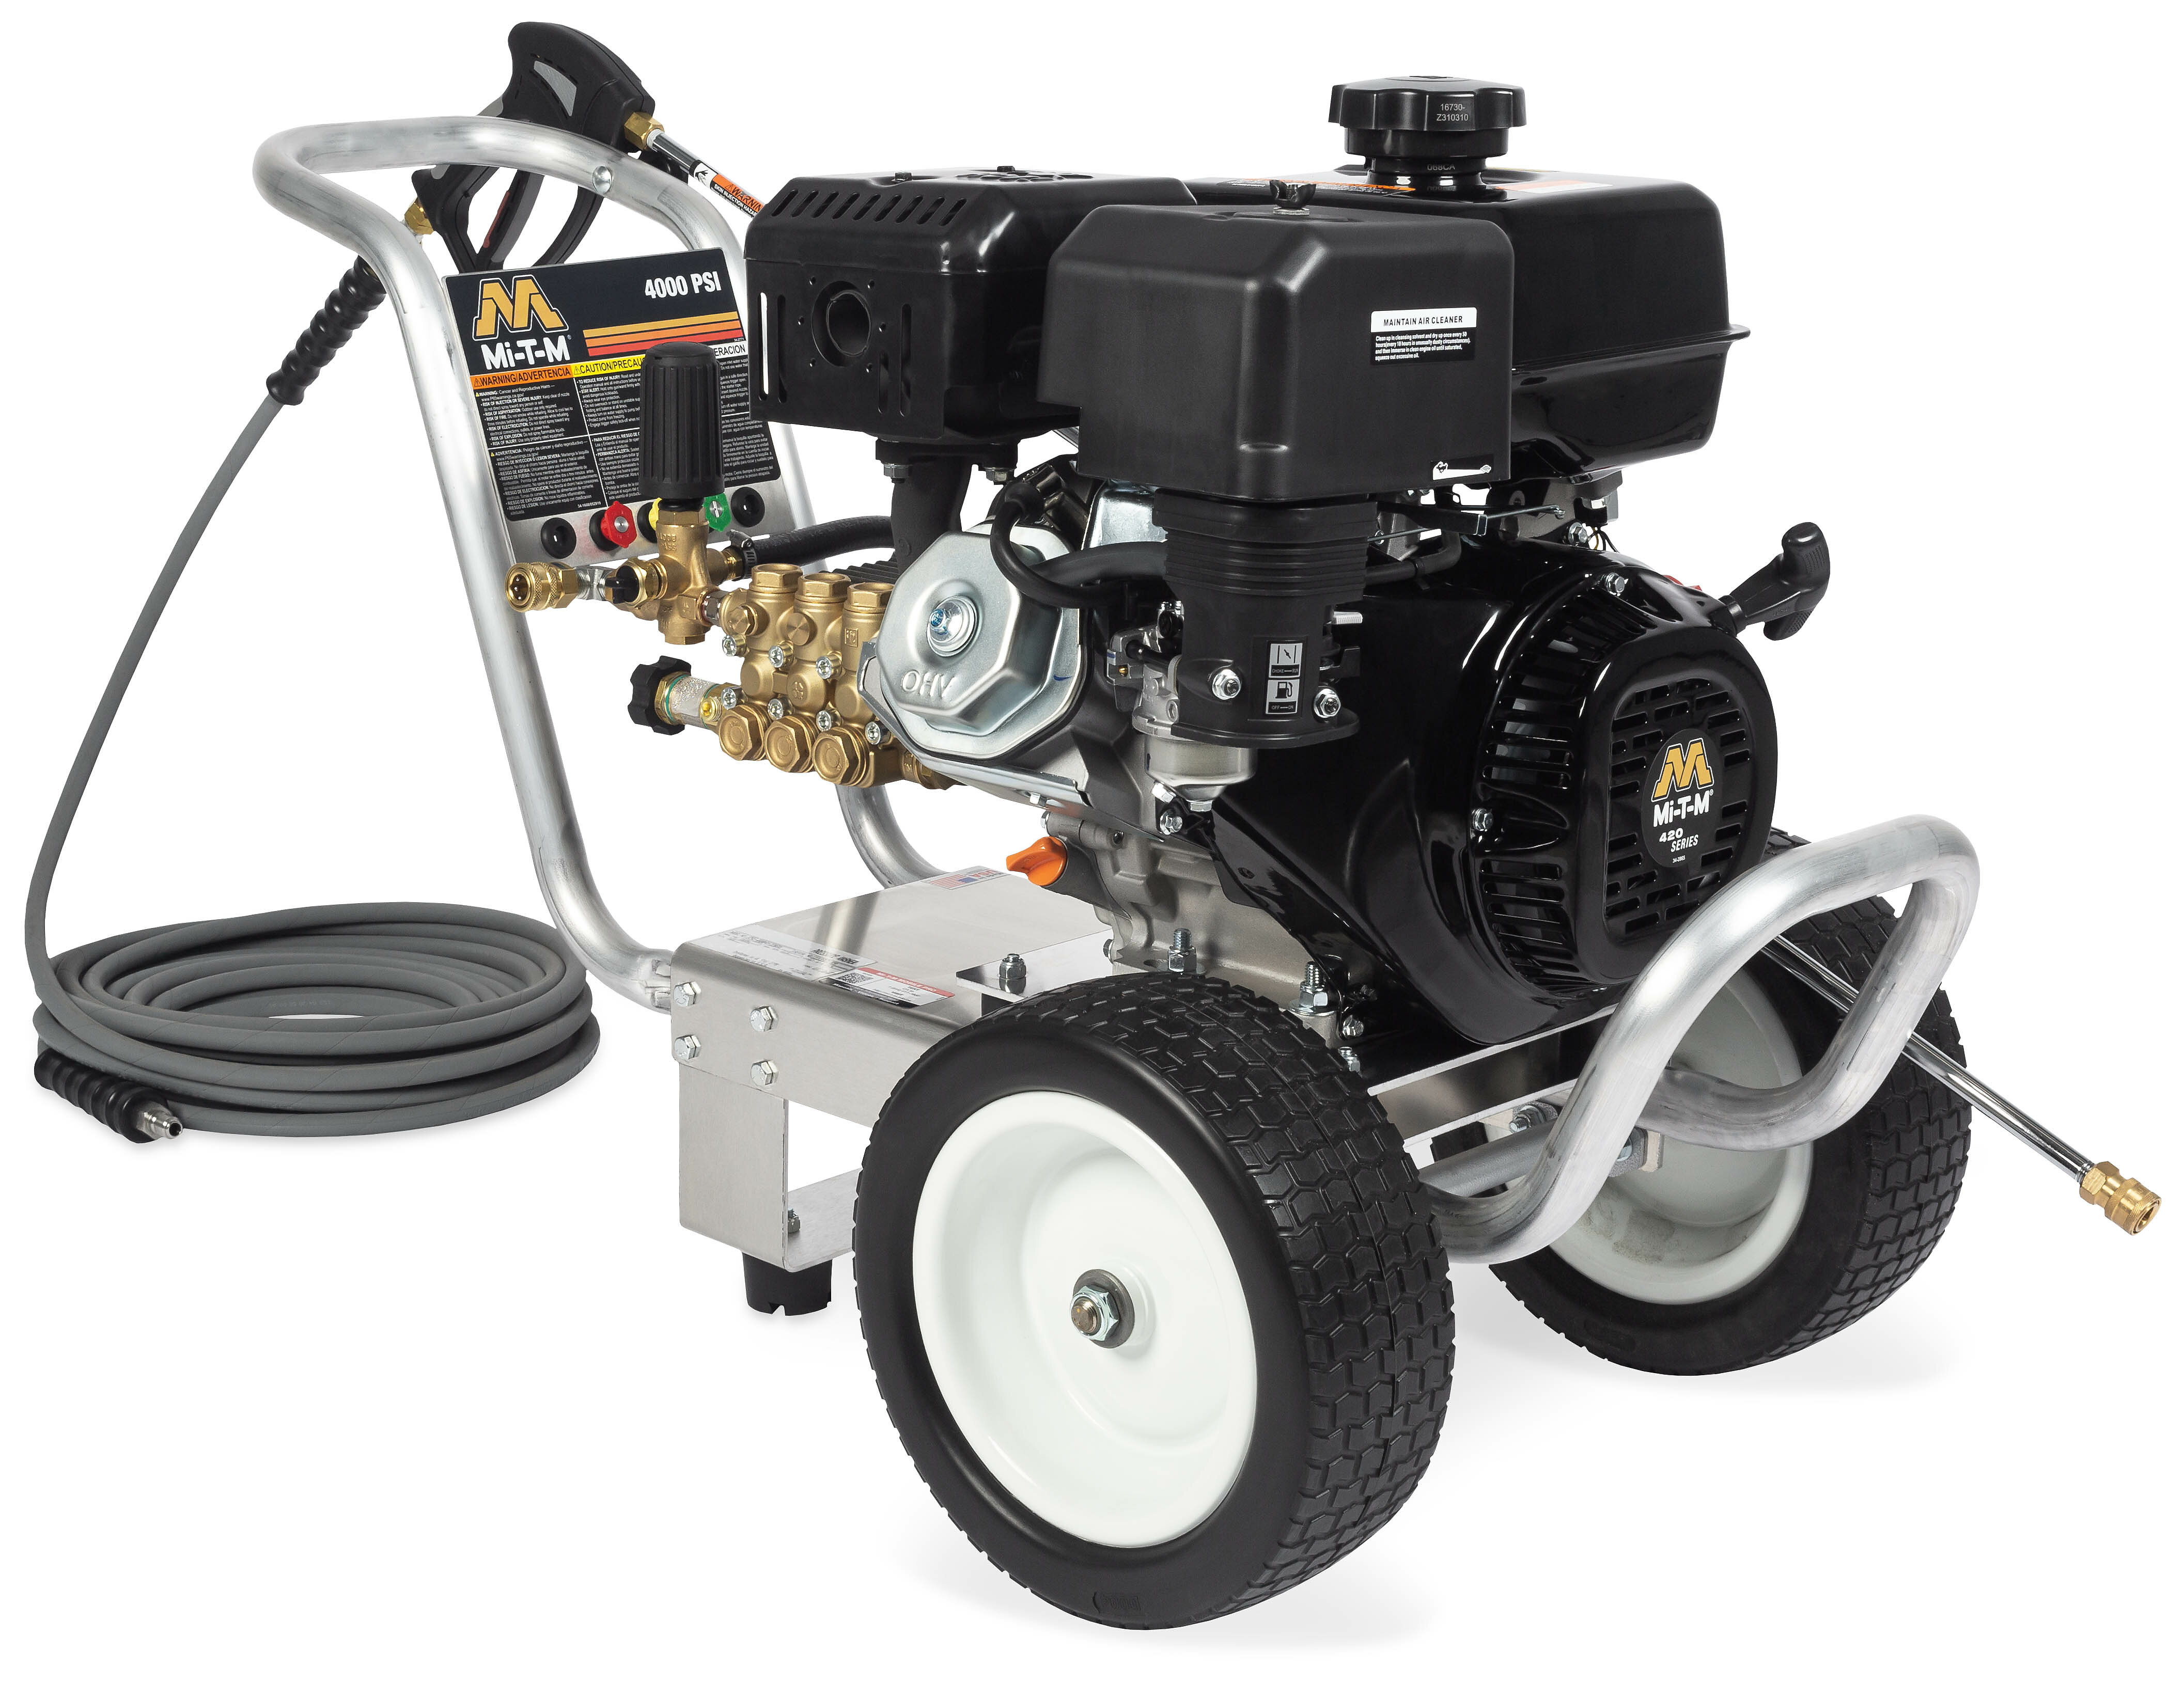 MI-T-M PRESSURE WASHER GAS 
COLD WATER #CA4004-1MGM DIRECT 
DRIVE WITH GENERAL PUMP 
W/EXTERNAL BYPASS, MI-T-M 
ENGINE, 4000 P.S.I, 4 GPM, 
ALUMINUM FRAME